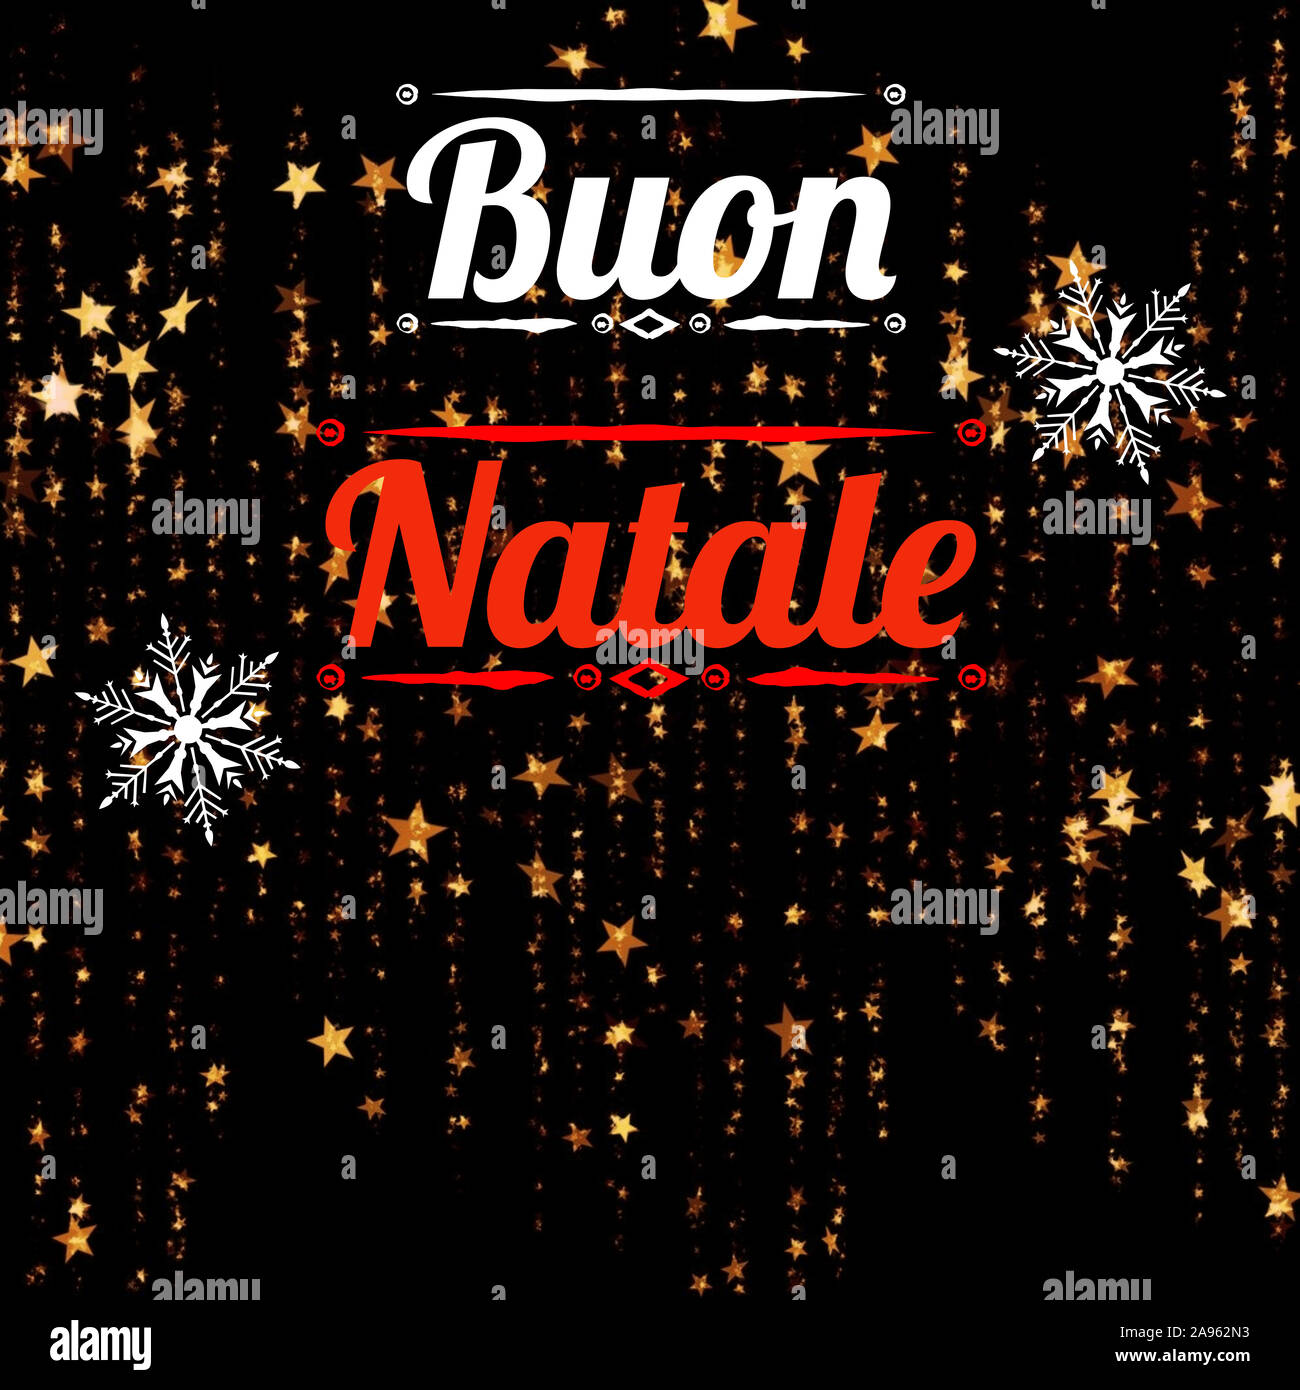 Buon Natale Wallpaper.Illustration With Buon Natale Written In Italian Language With Stars And Decorations Christmas Model For Web Wallpaper Digital Graphics Stock Photo Alamy